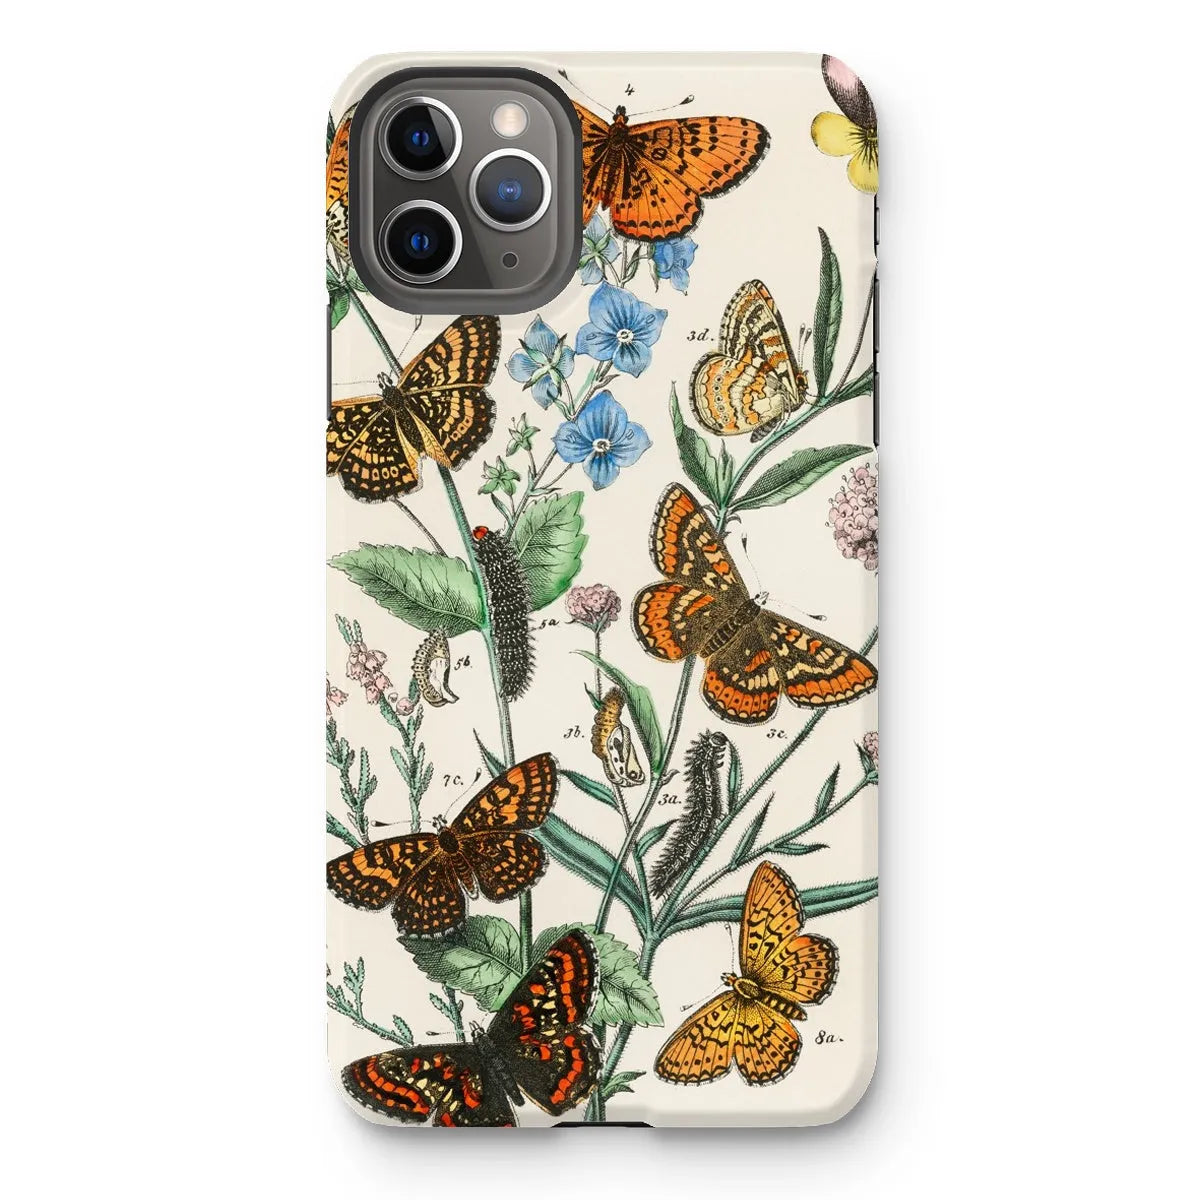 This Butterfly Aesthetic Art Phone Case - William Forsell Kirby - Iphone 11 Pro Max / Matte - Mobile Phone Cases